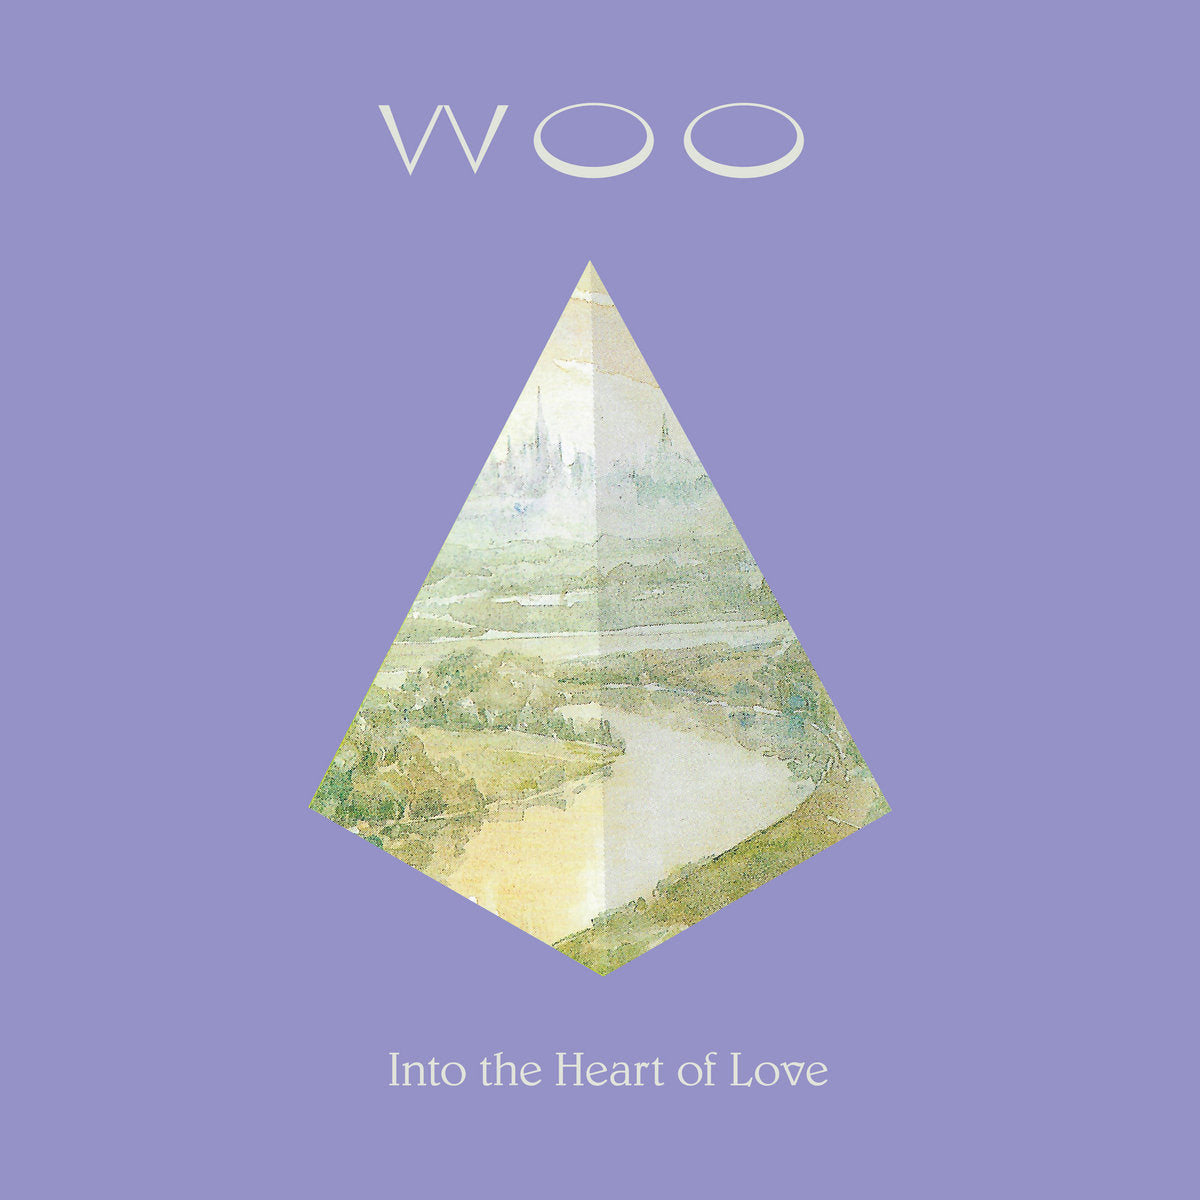 Woo "Into The Heart Of Love" 2LP